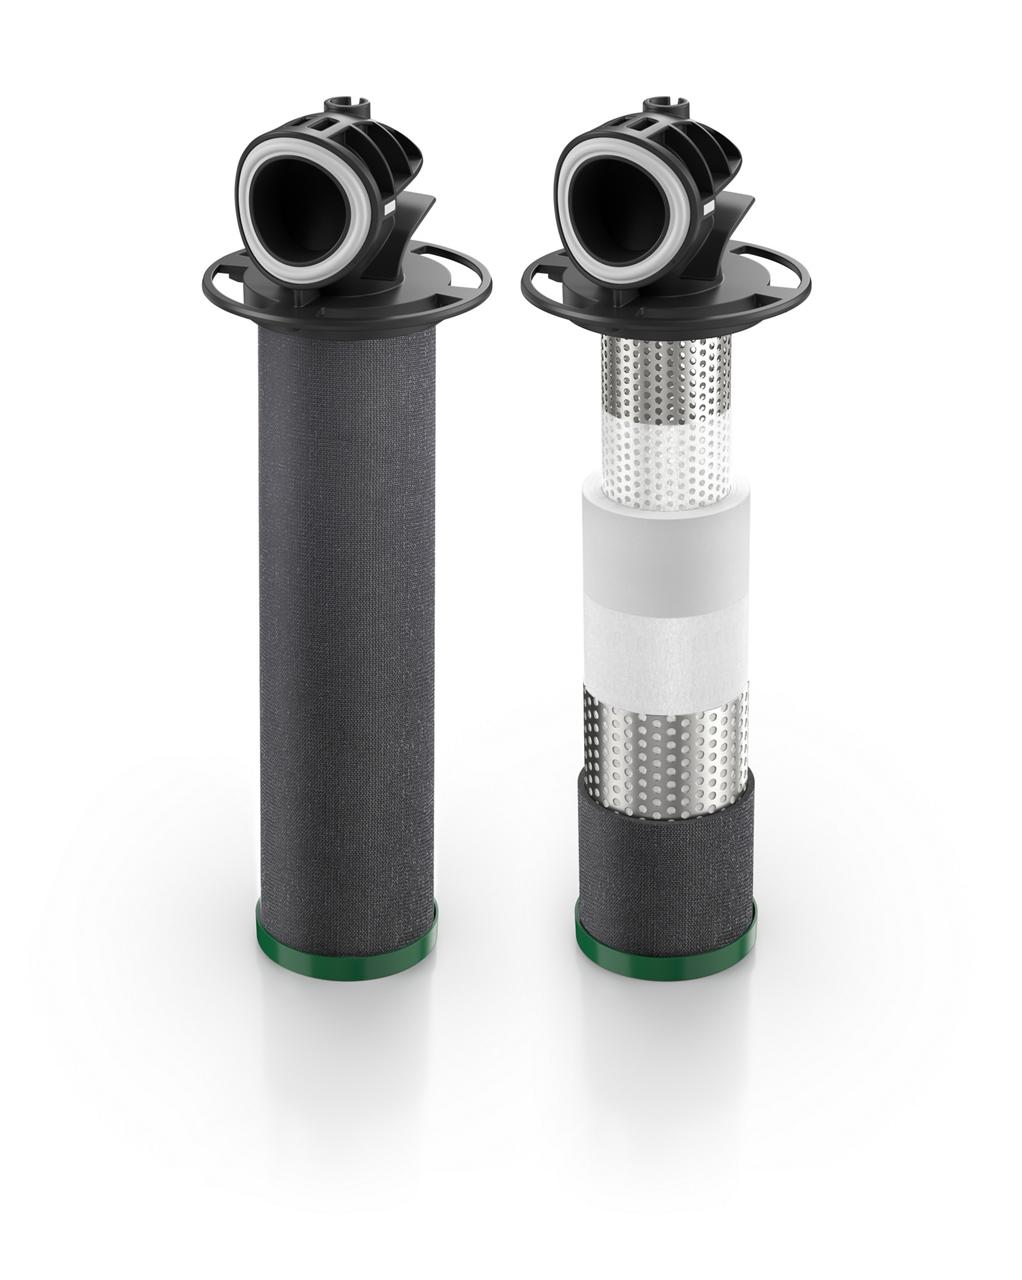 UD+ Next generation compressed air filters